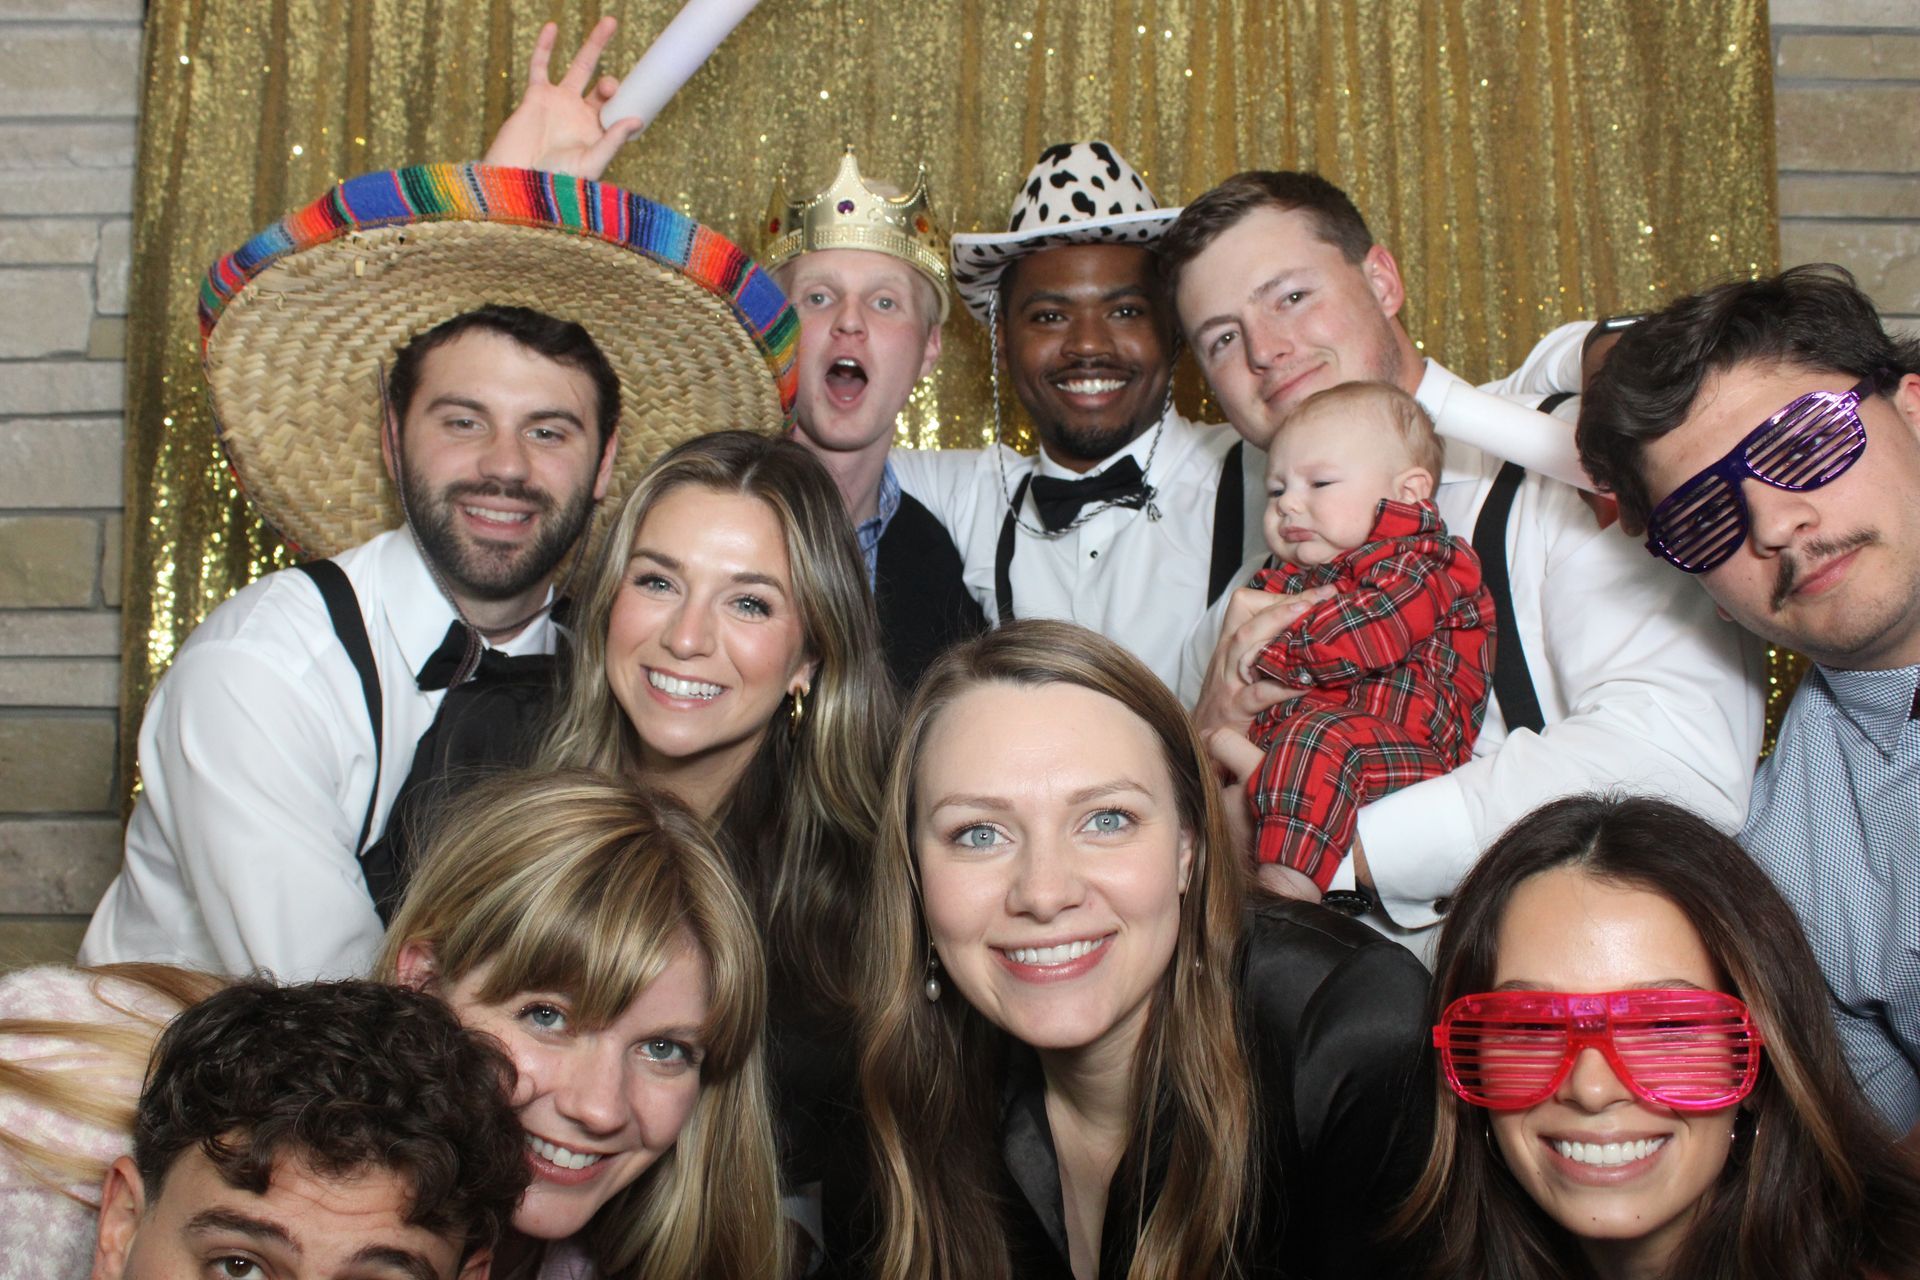 Fun props included with Mansfield photo booth rentals for weddings, birthdays, corporate events